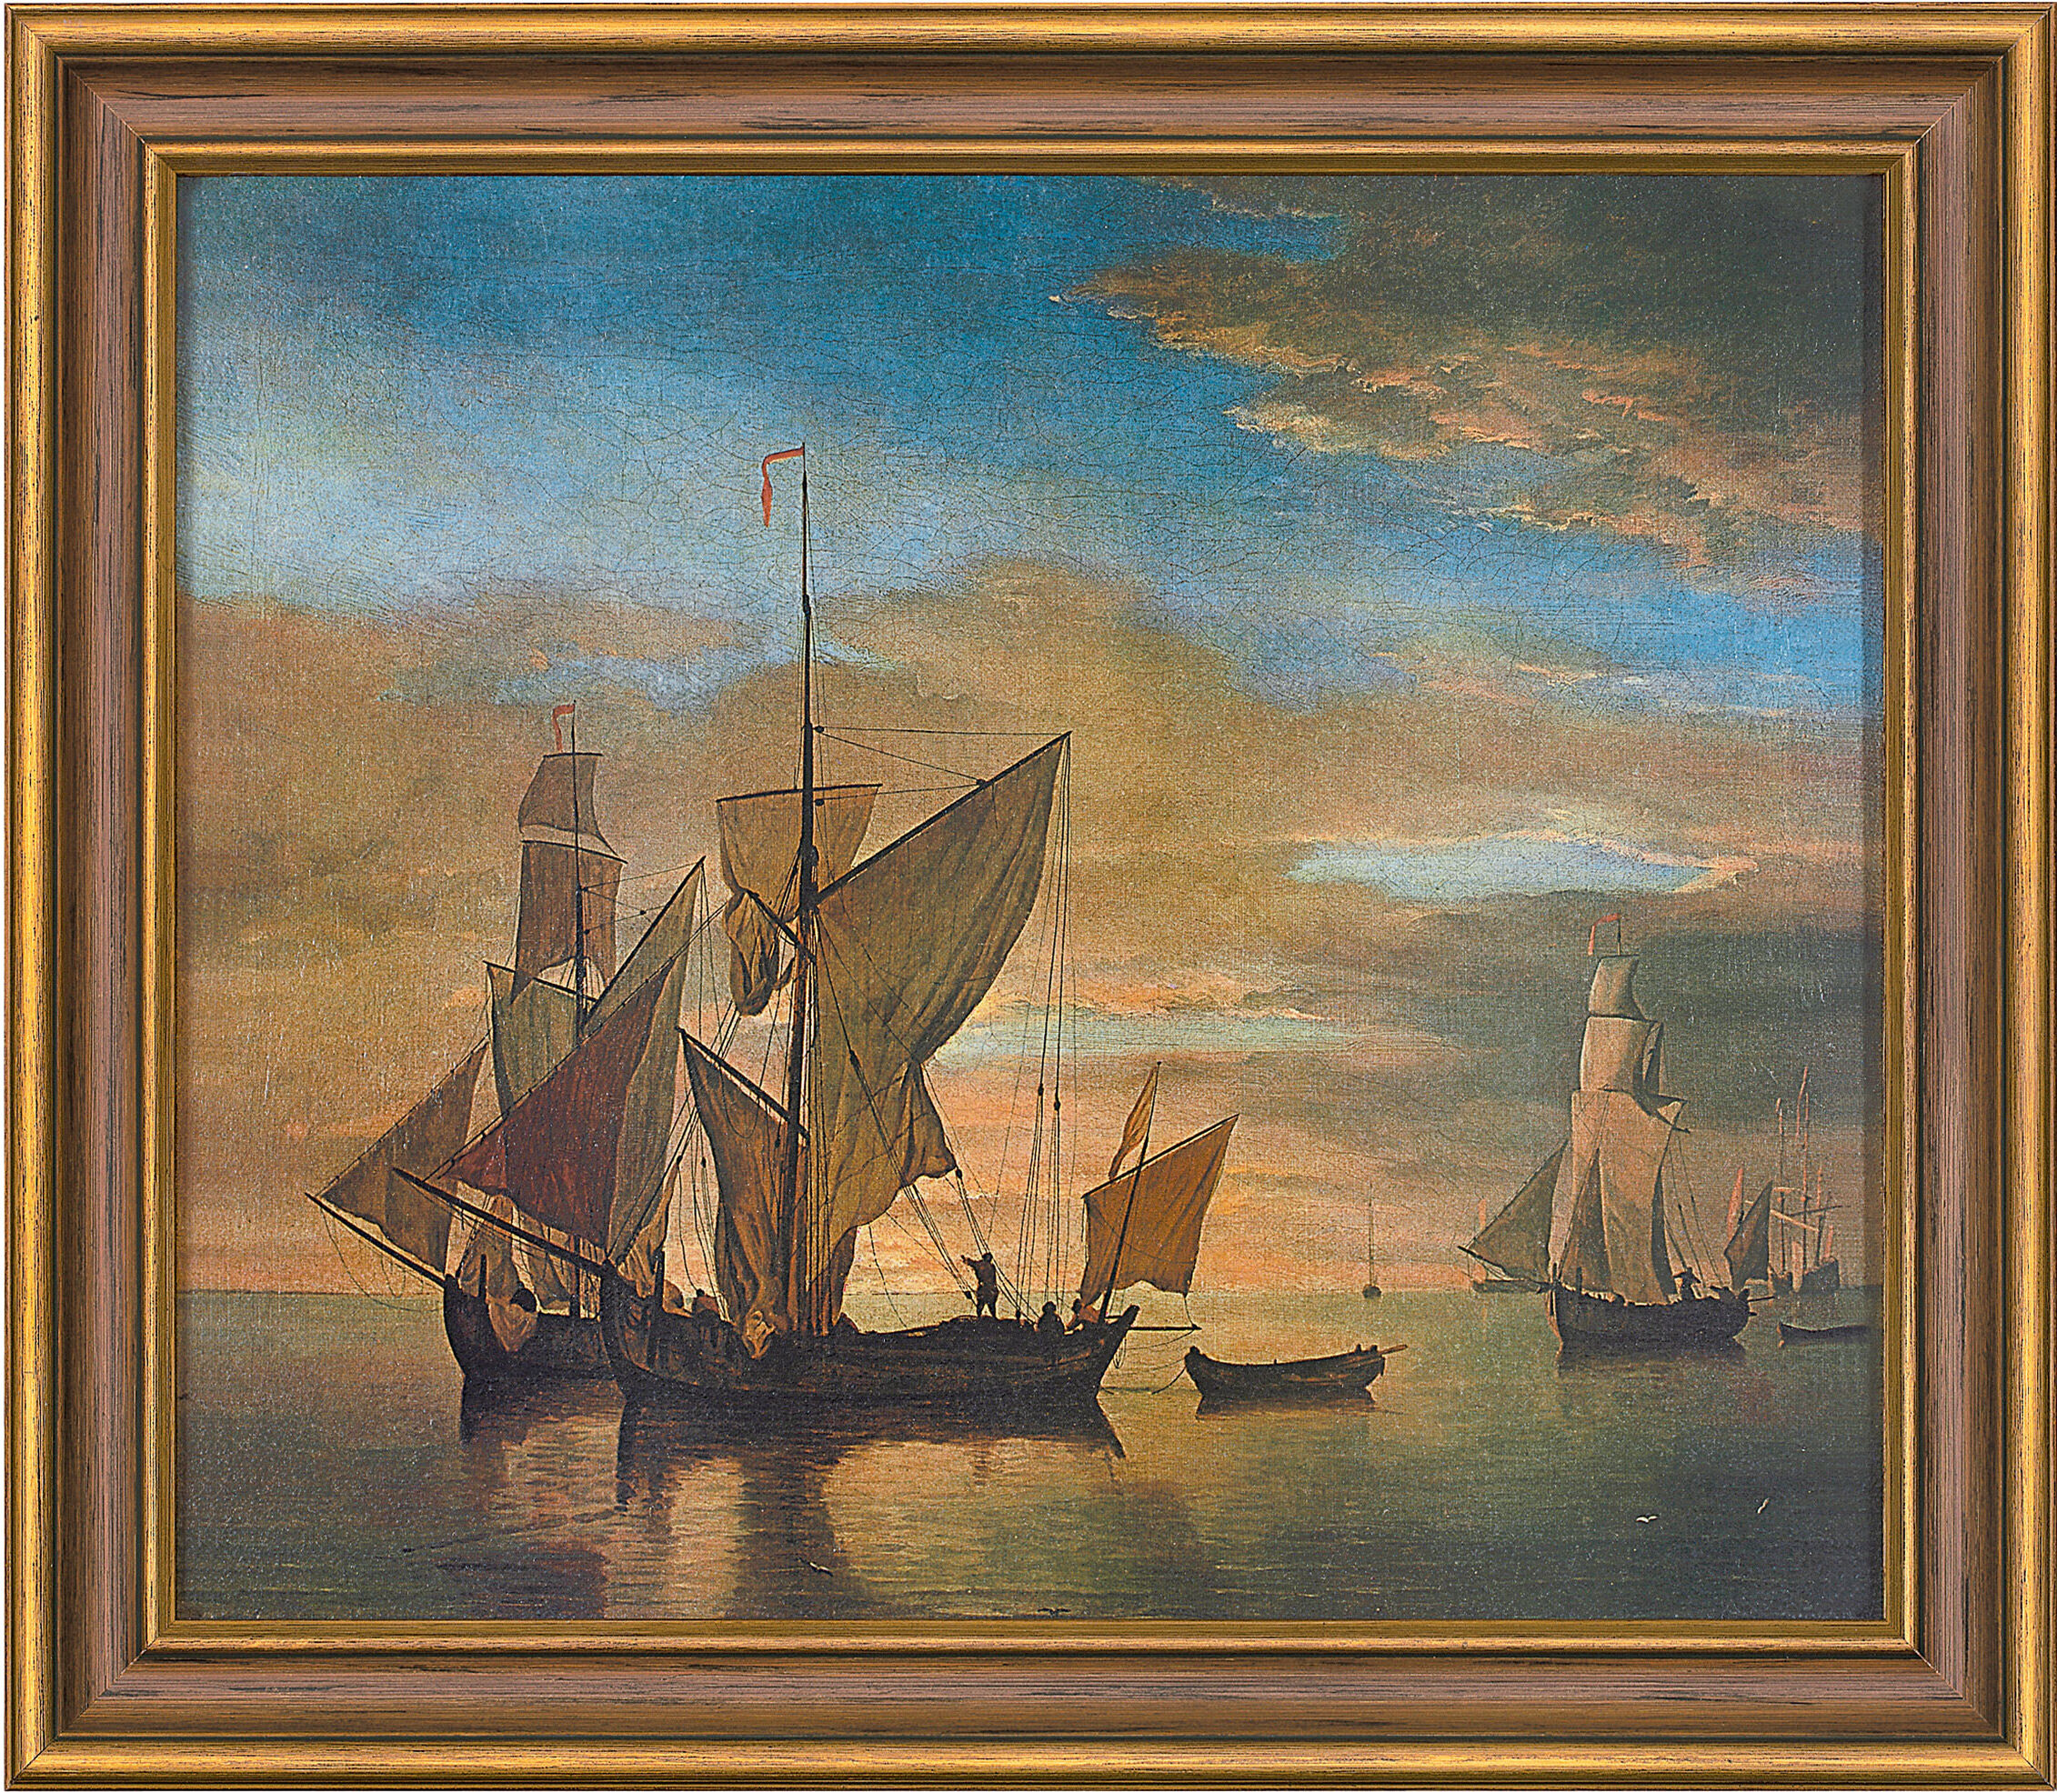 Picture "Ships on a Calm Sea in the Evening Light" (1685), framed by Willem van de Velde